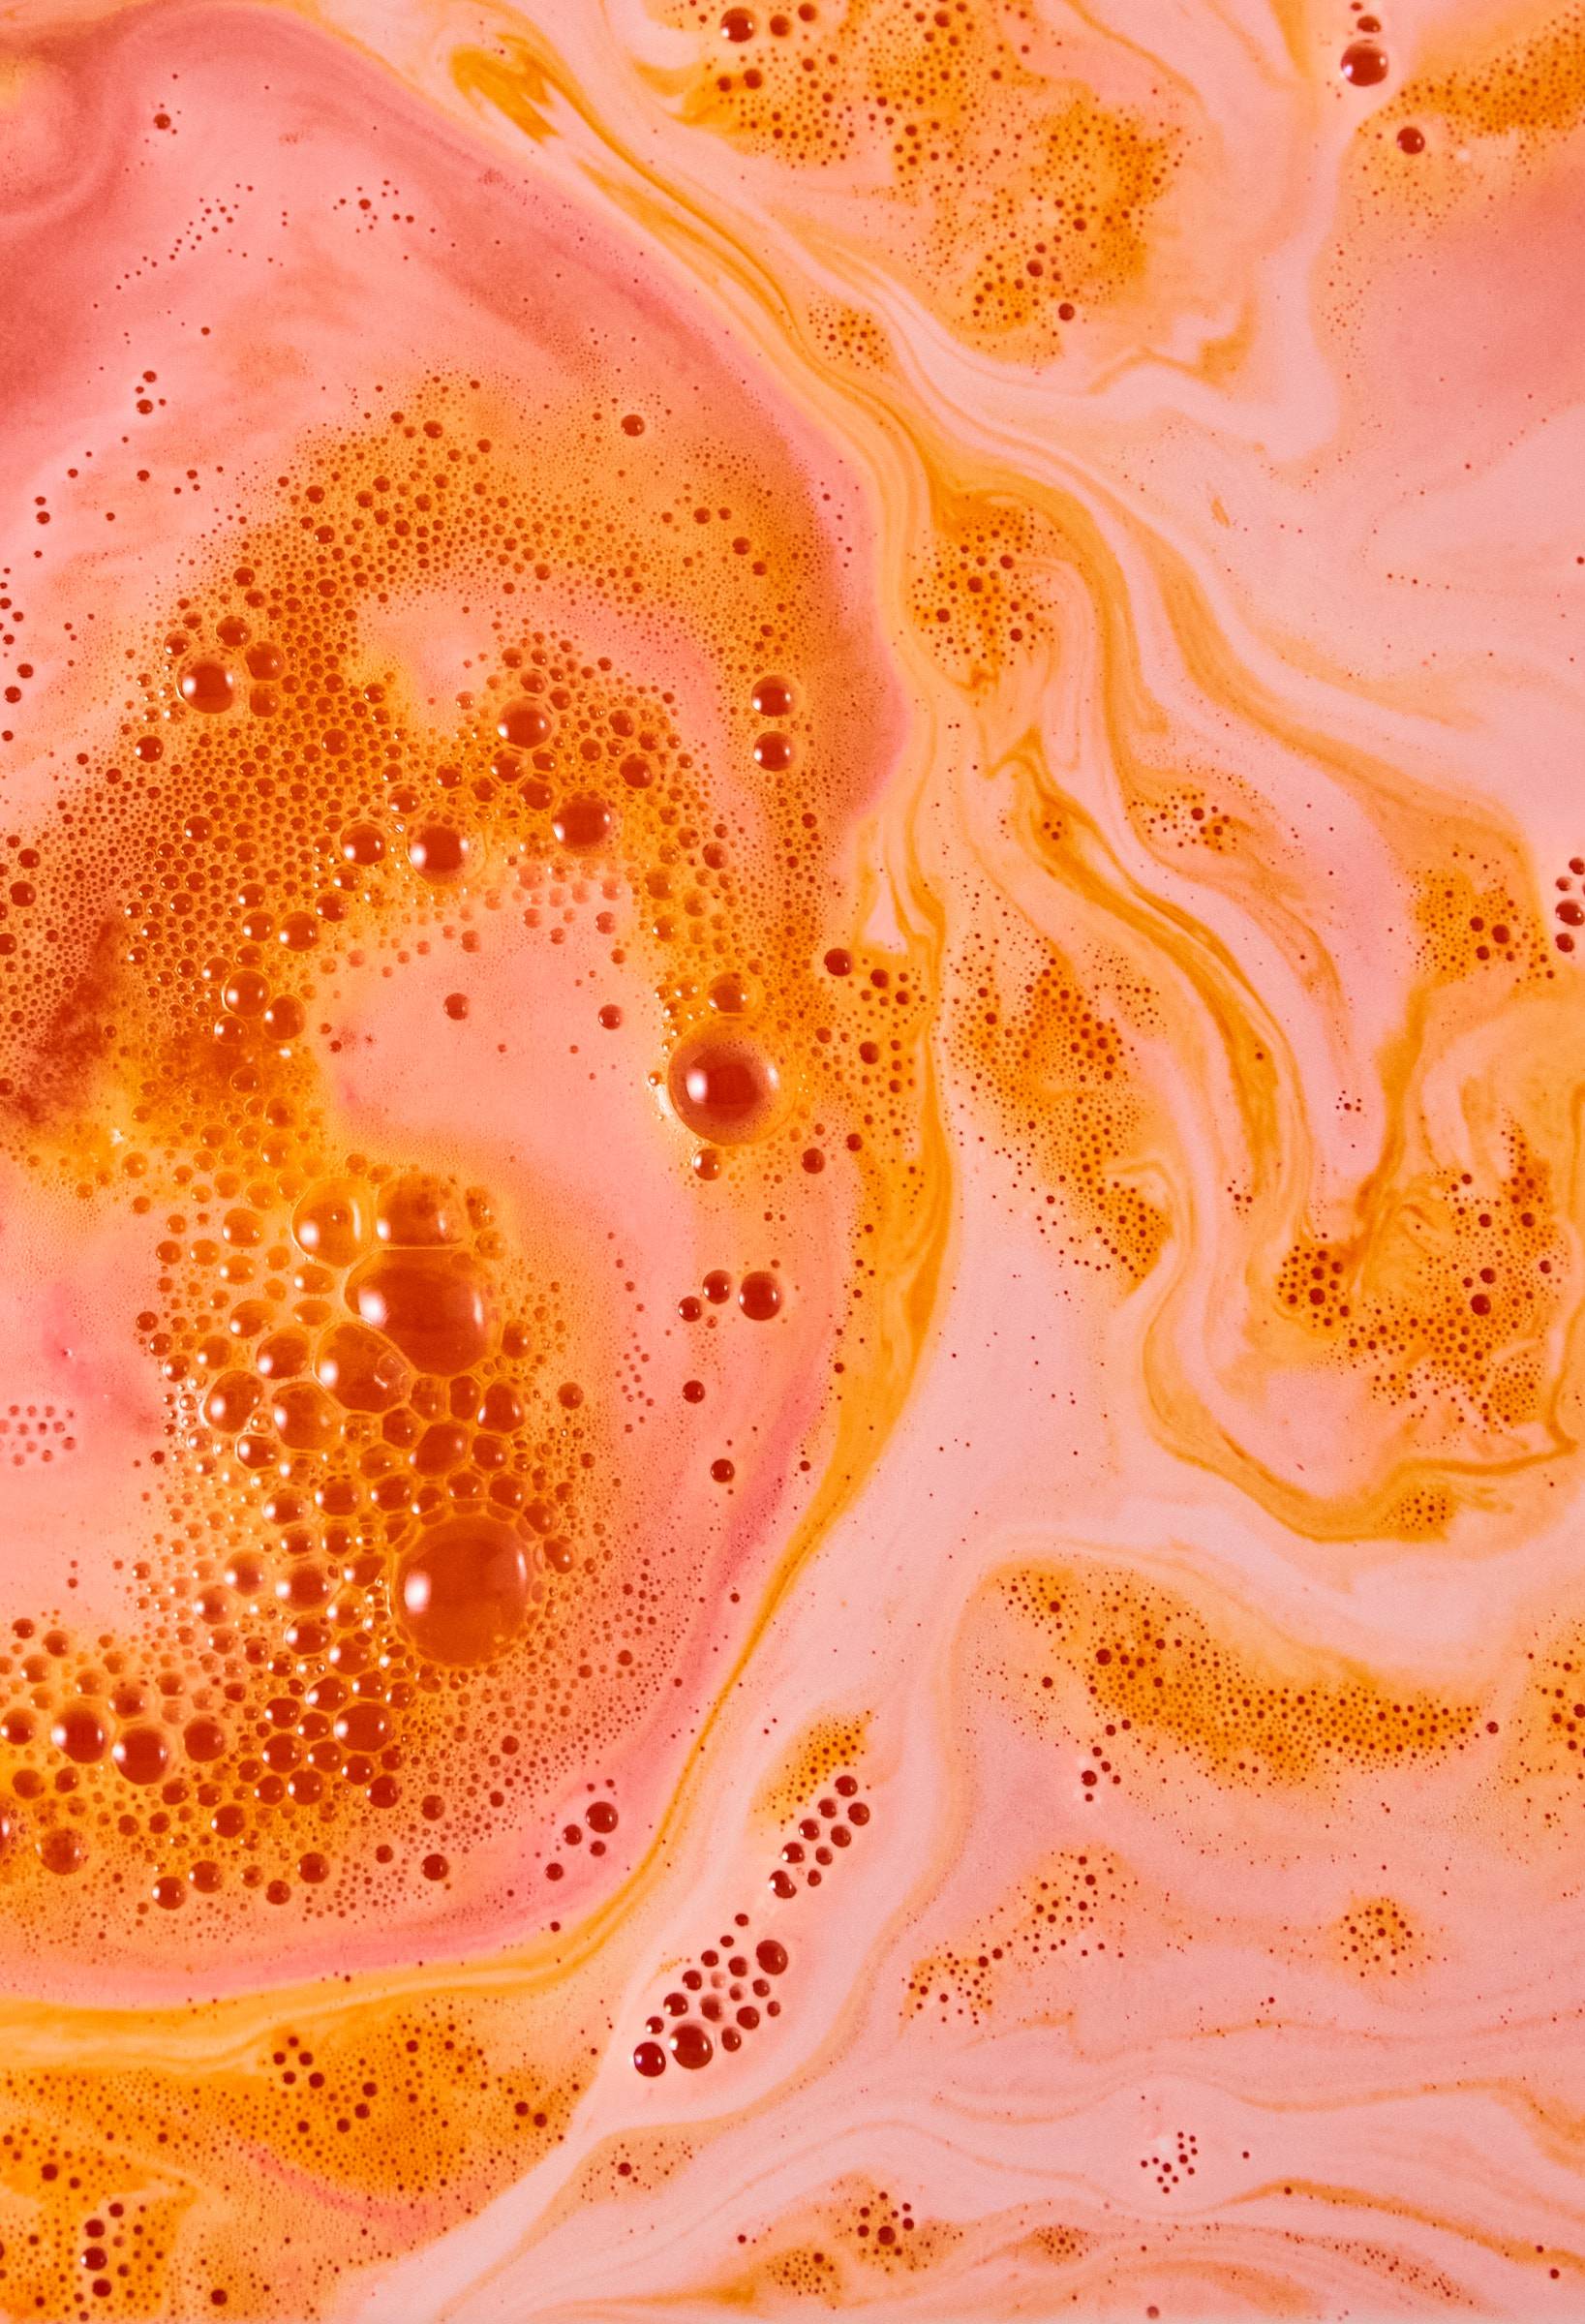 The Inner Dragon bath bomb has dissolved leaving a fiery blanket of orange and red swirls and bubbles. 